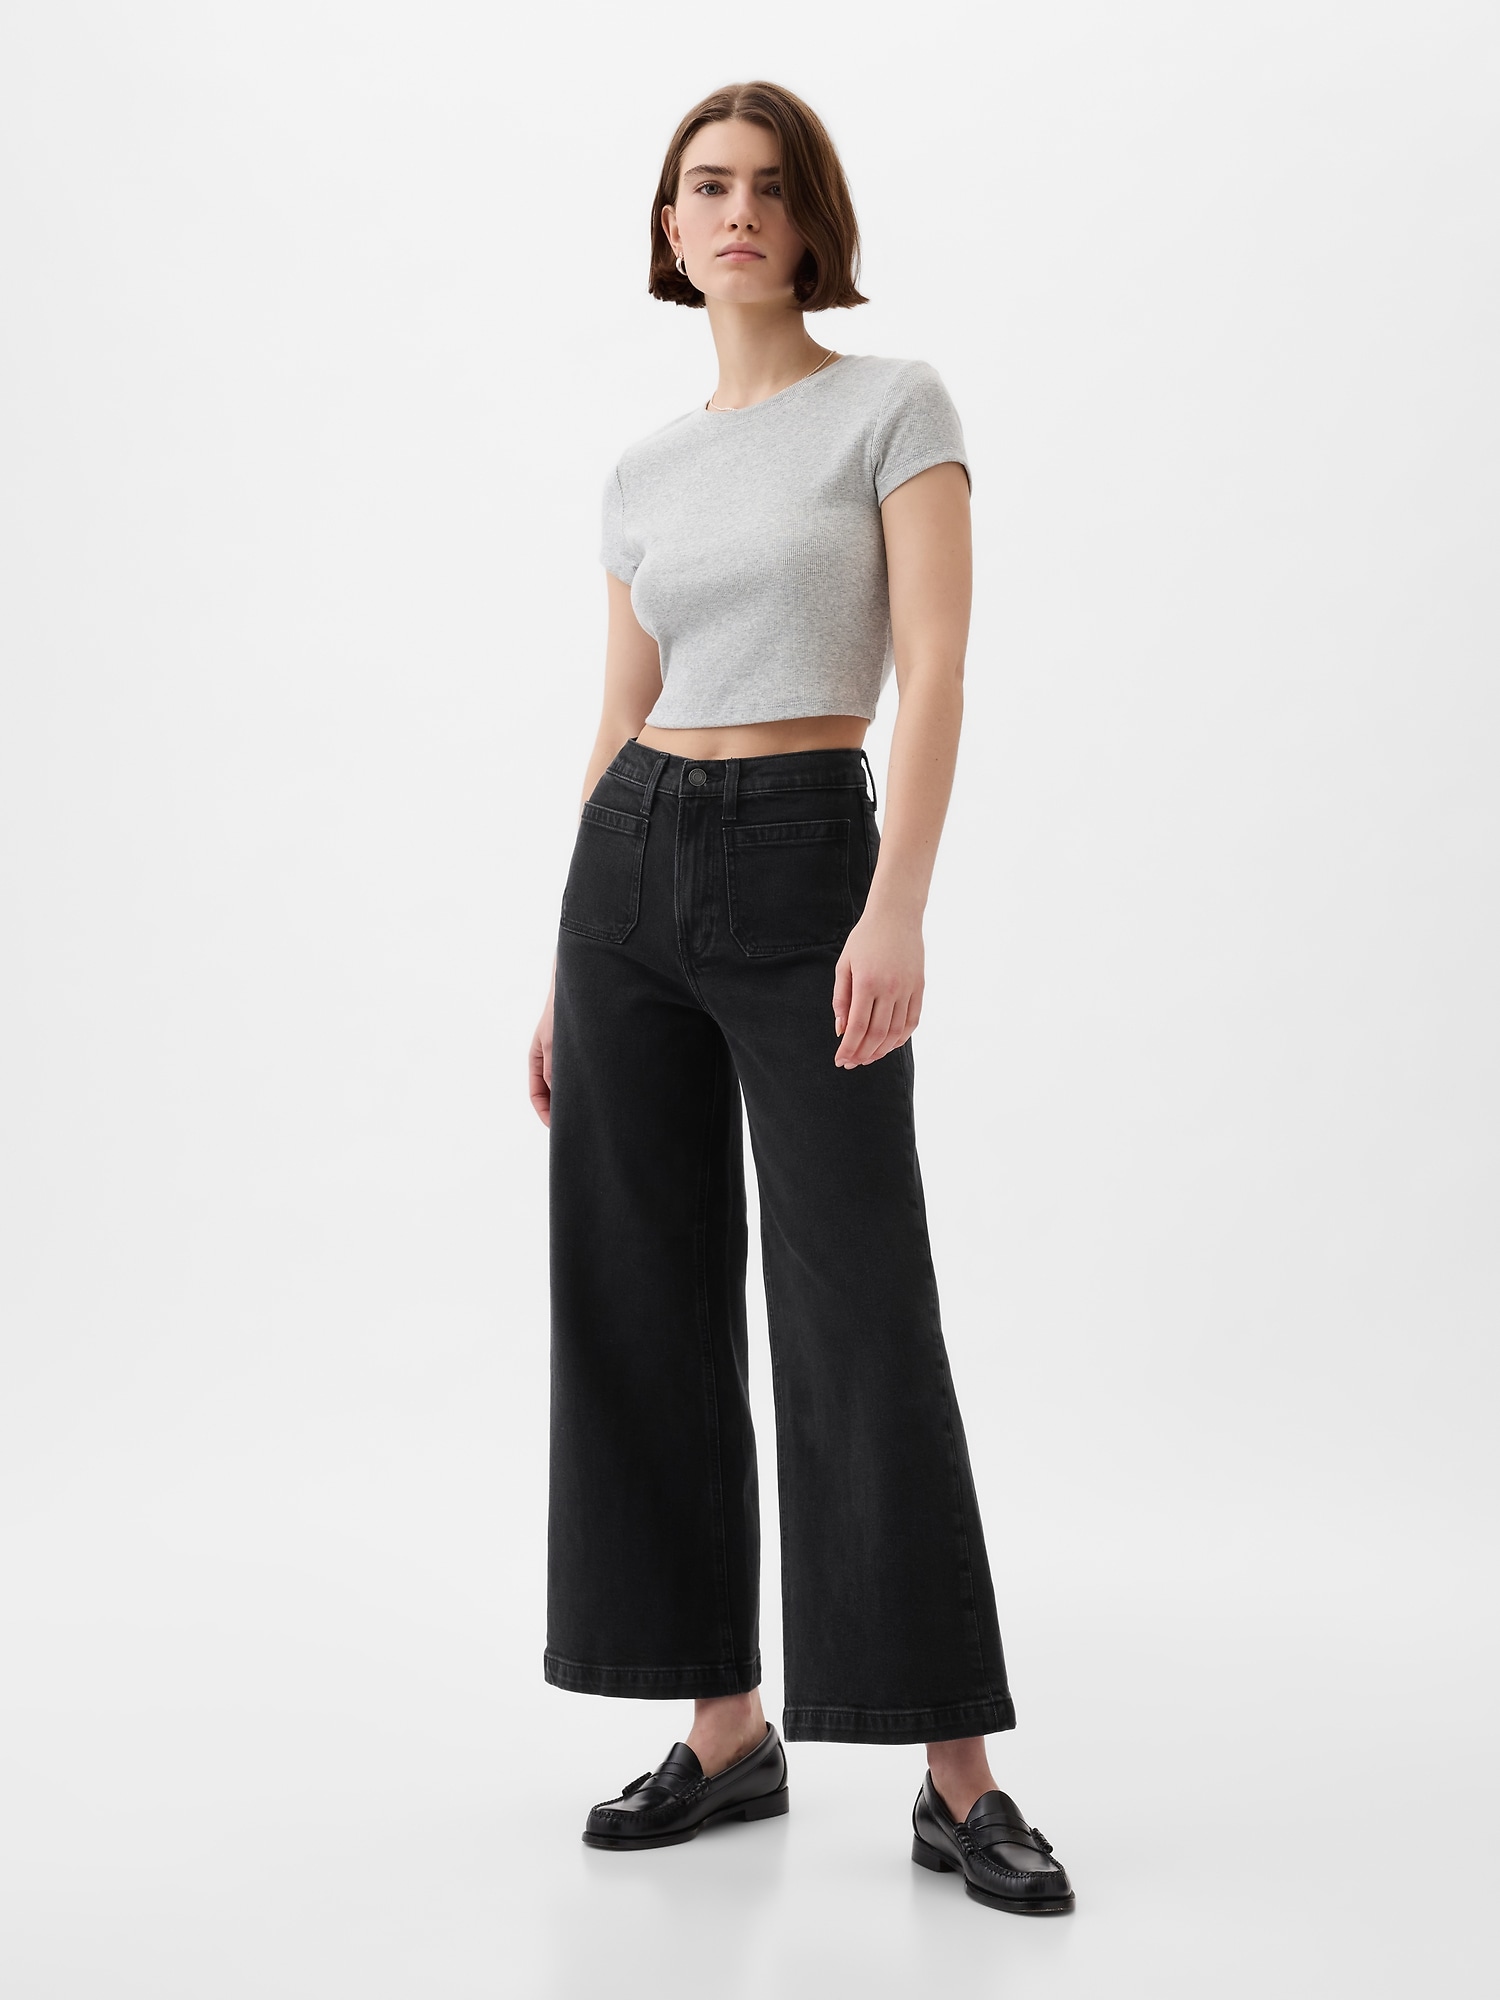 Ankle Length Pants for Women